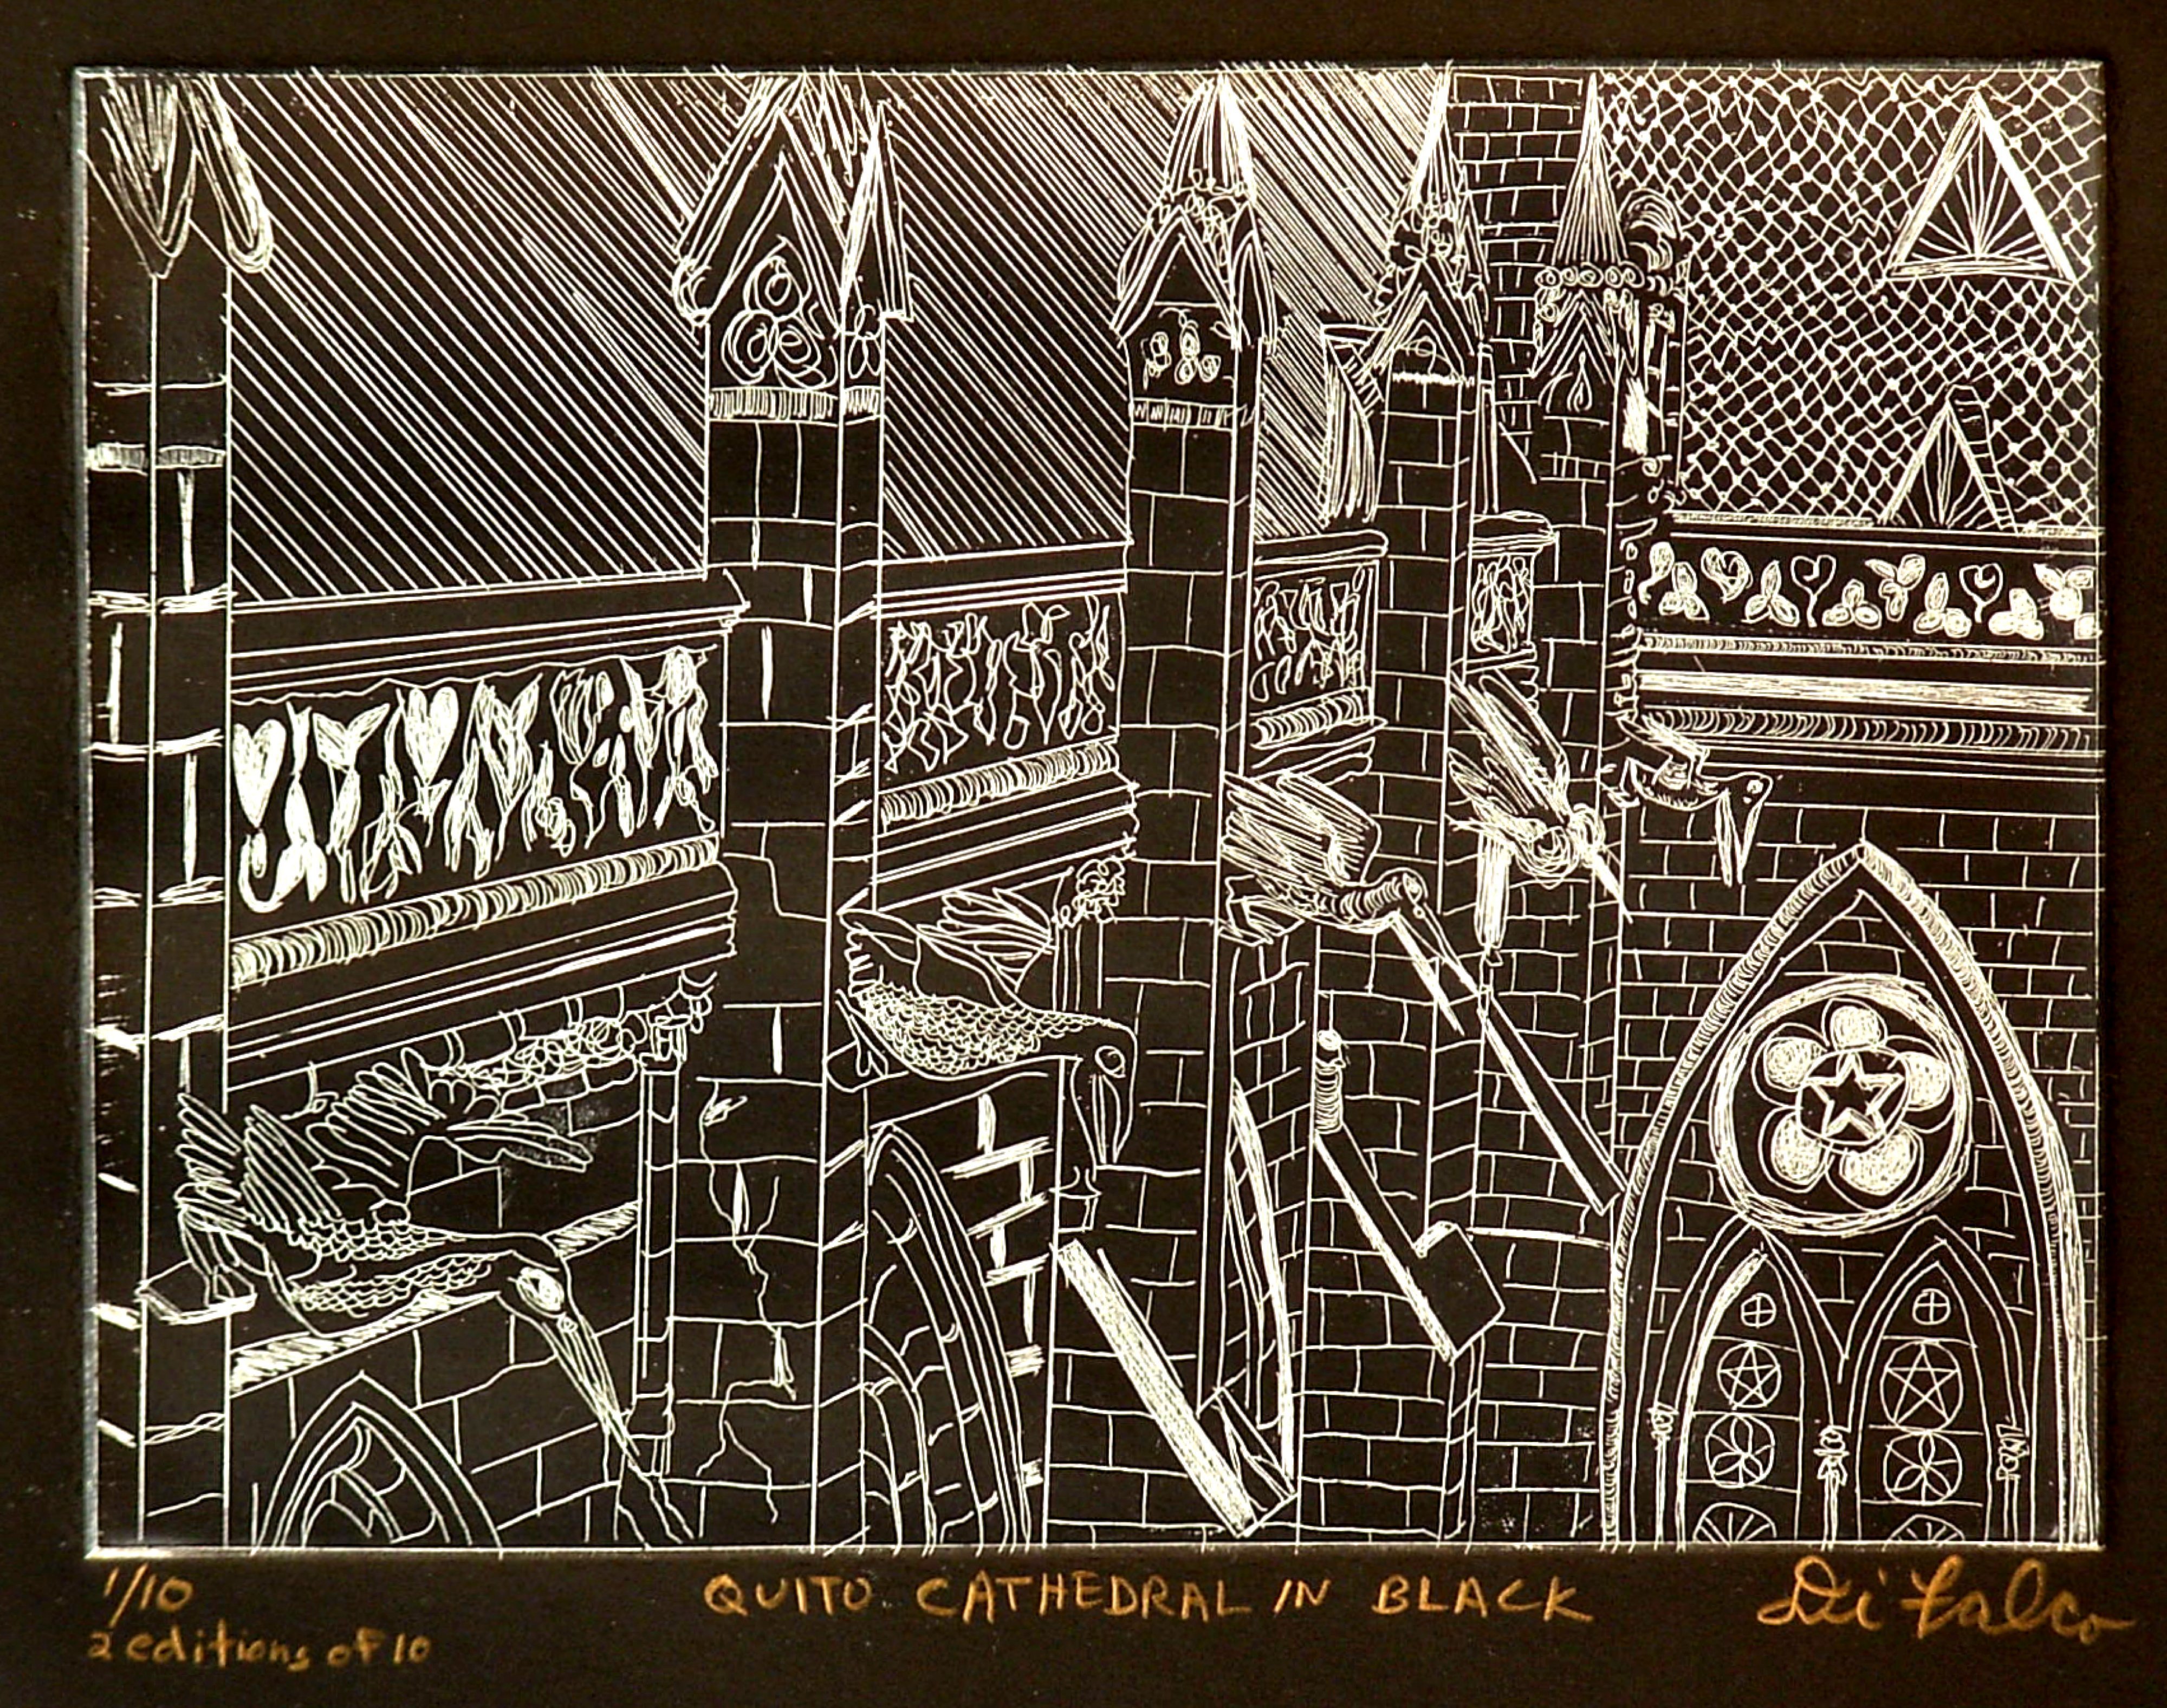 Jerry  Di Falco: 'Quito Cathedral in Black', 2010 Intaglio, Architecture. This print is taken from a photo detailing the unusual roof of Quito Cathedral in Ecuador, which is adorned with pelicans. I only used intaglio to enable the lines to become the only optical language and visual means of expression in the print. The edition size is limited to only ...